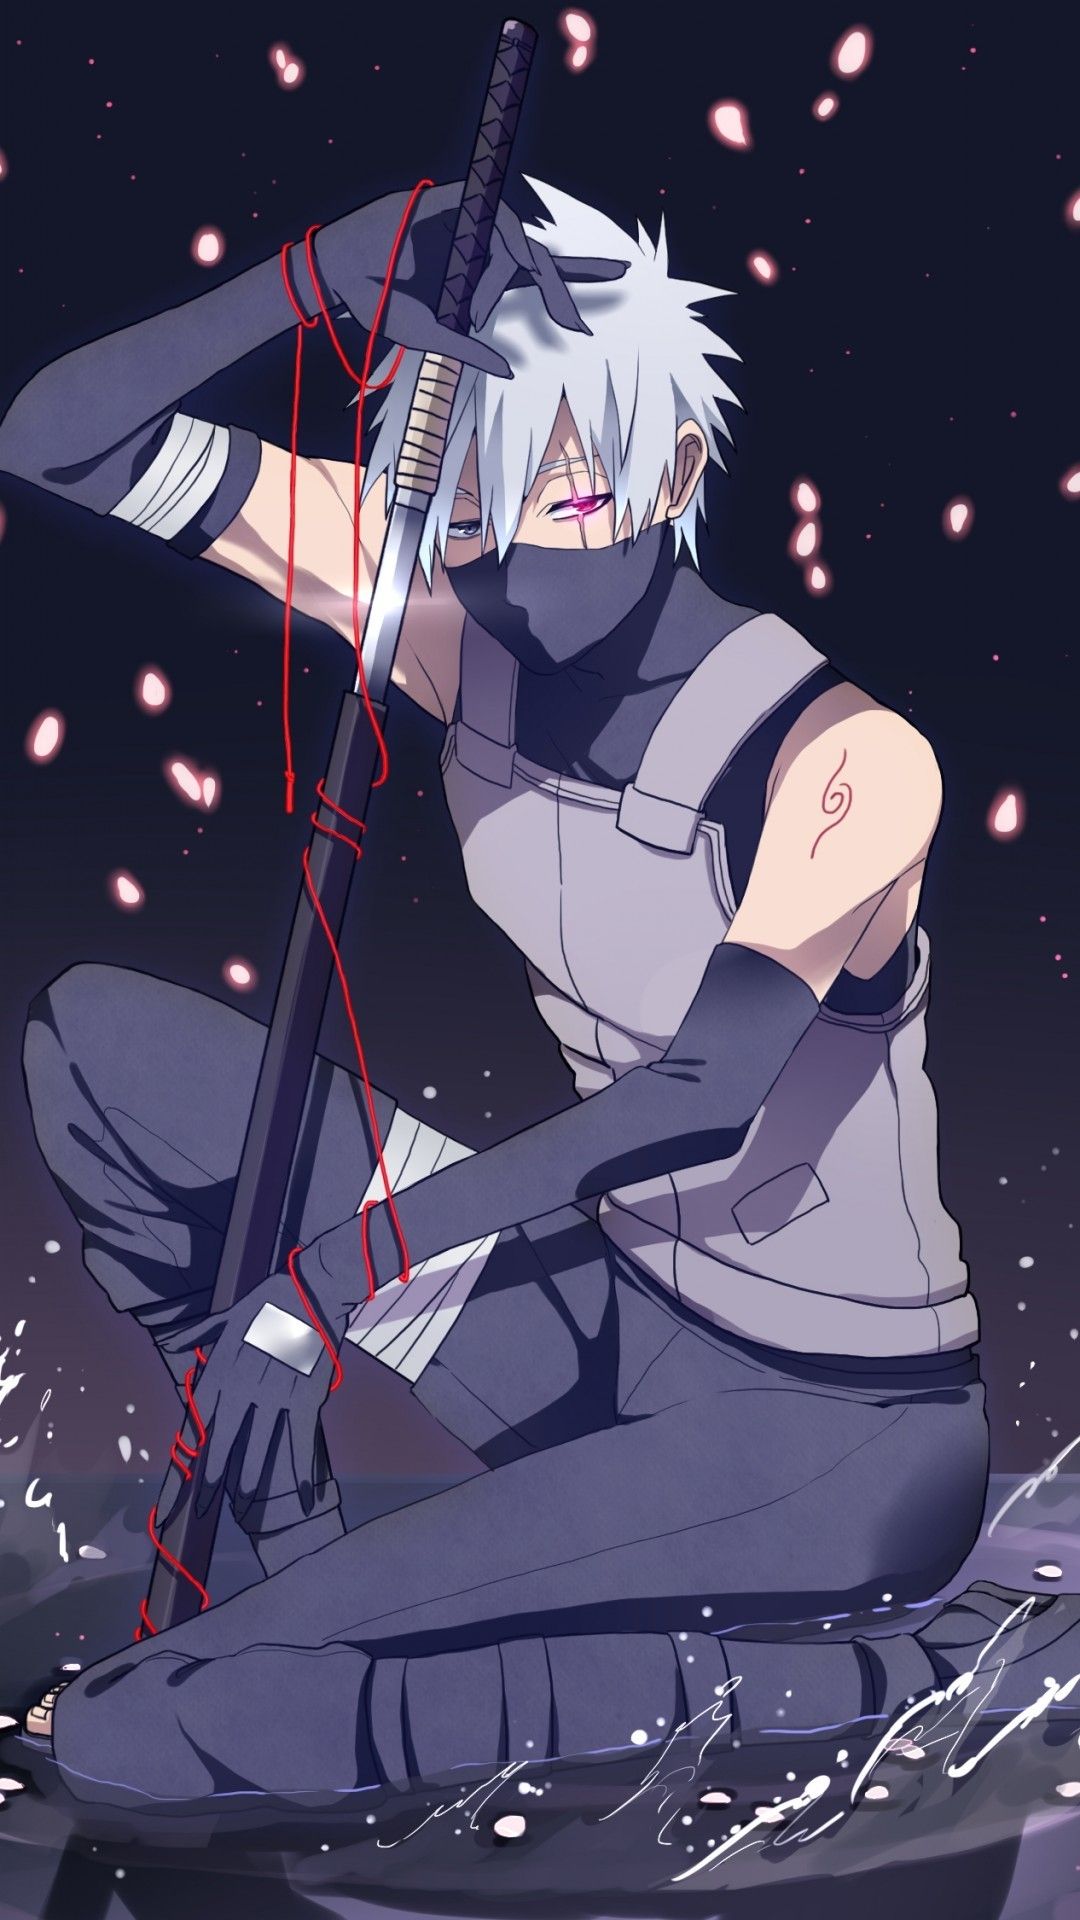 Cute Kakashi Wallpapers On Wallpaperdog Check out this fantastic collection of kakashi iphone wallpapers, with 30 kakashi iphone background images for your desktop, phone or tablet. cute kakashi wallpapers on wallpaperdog